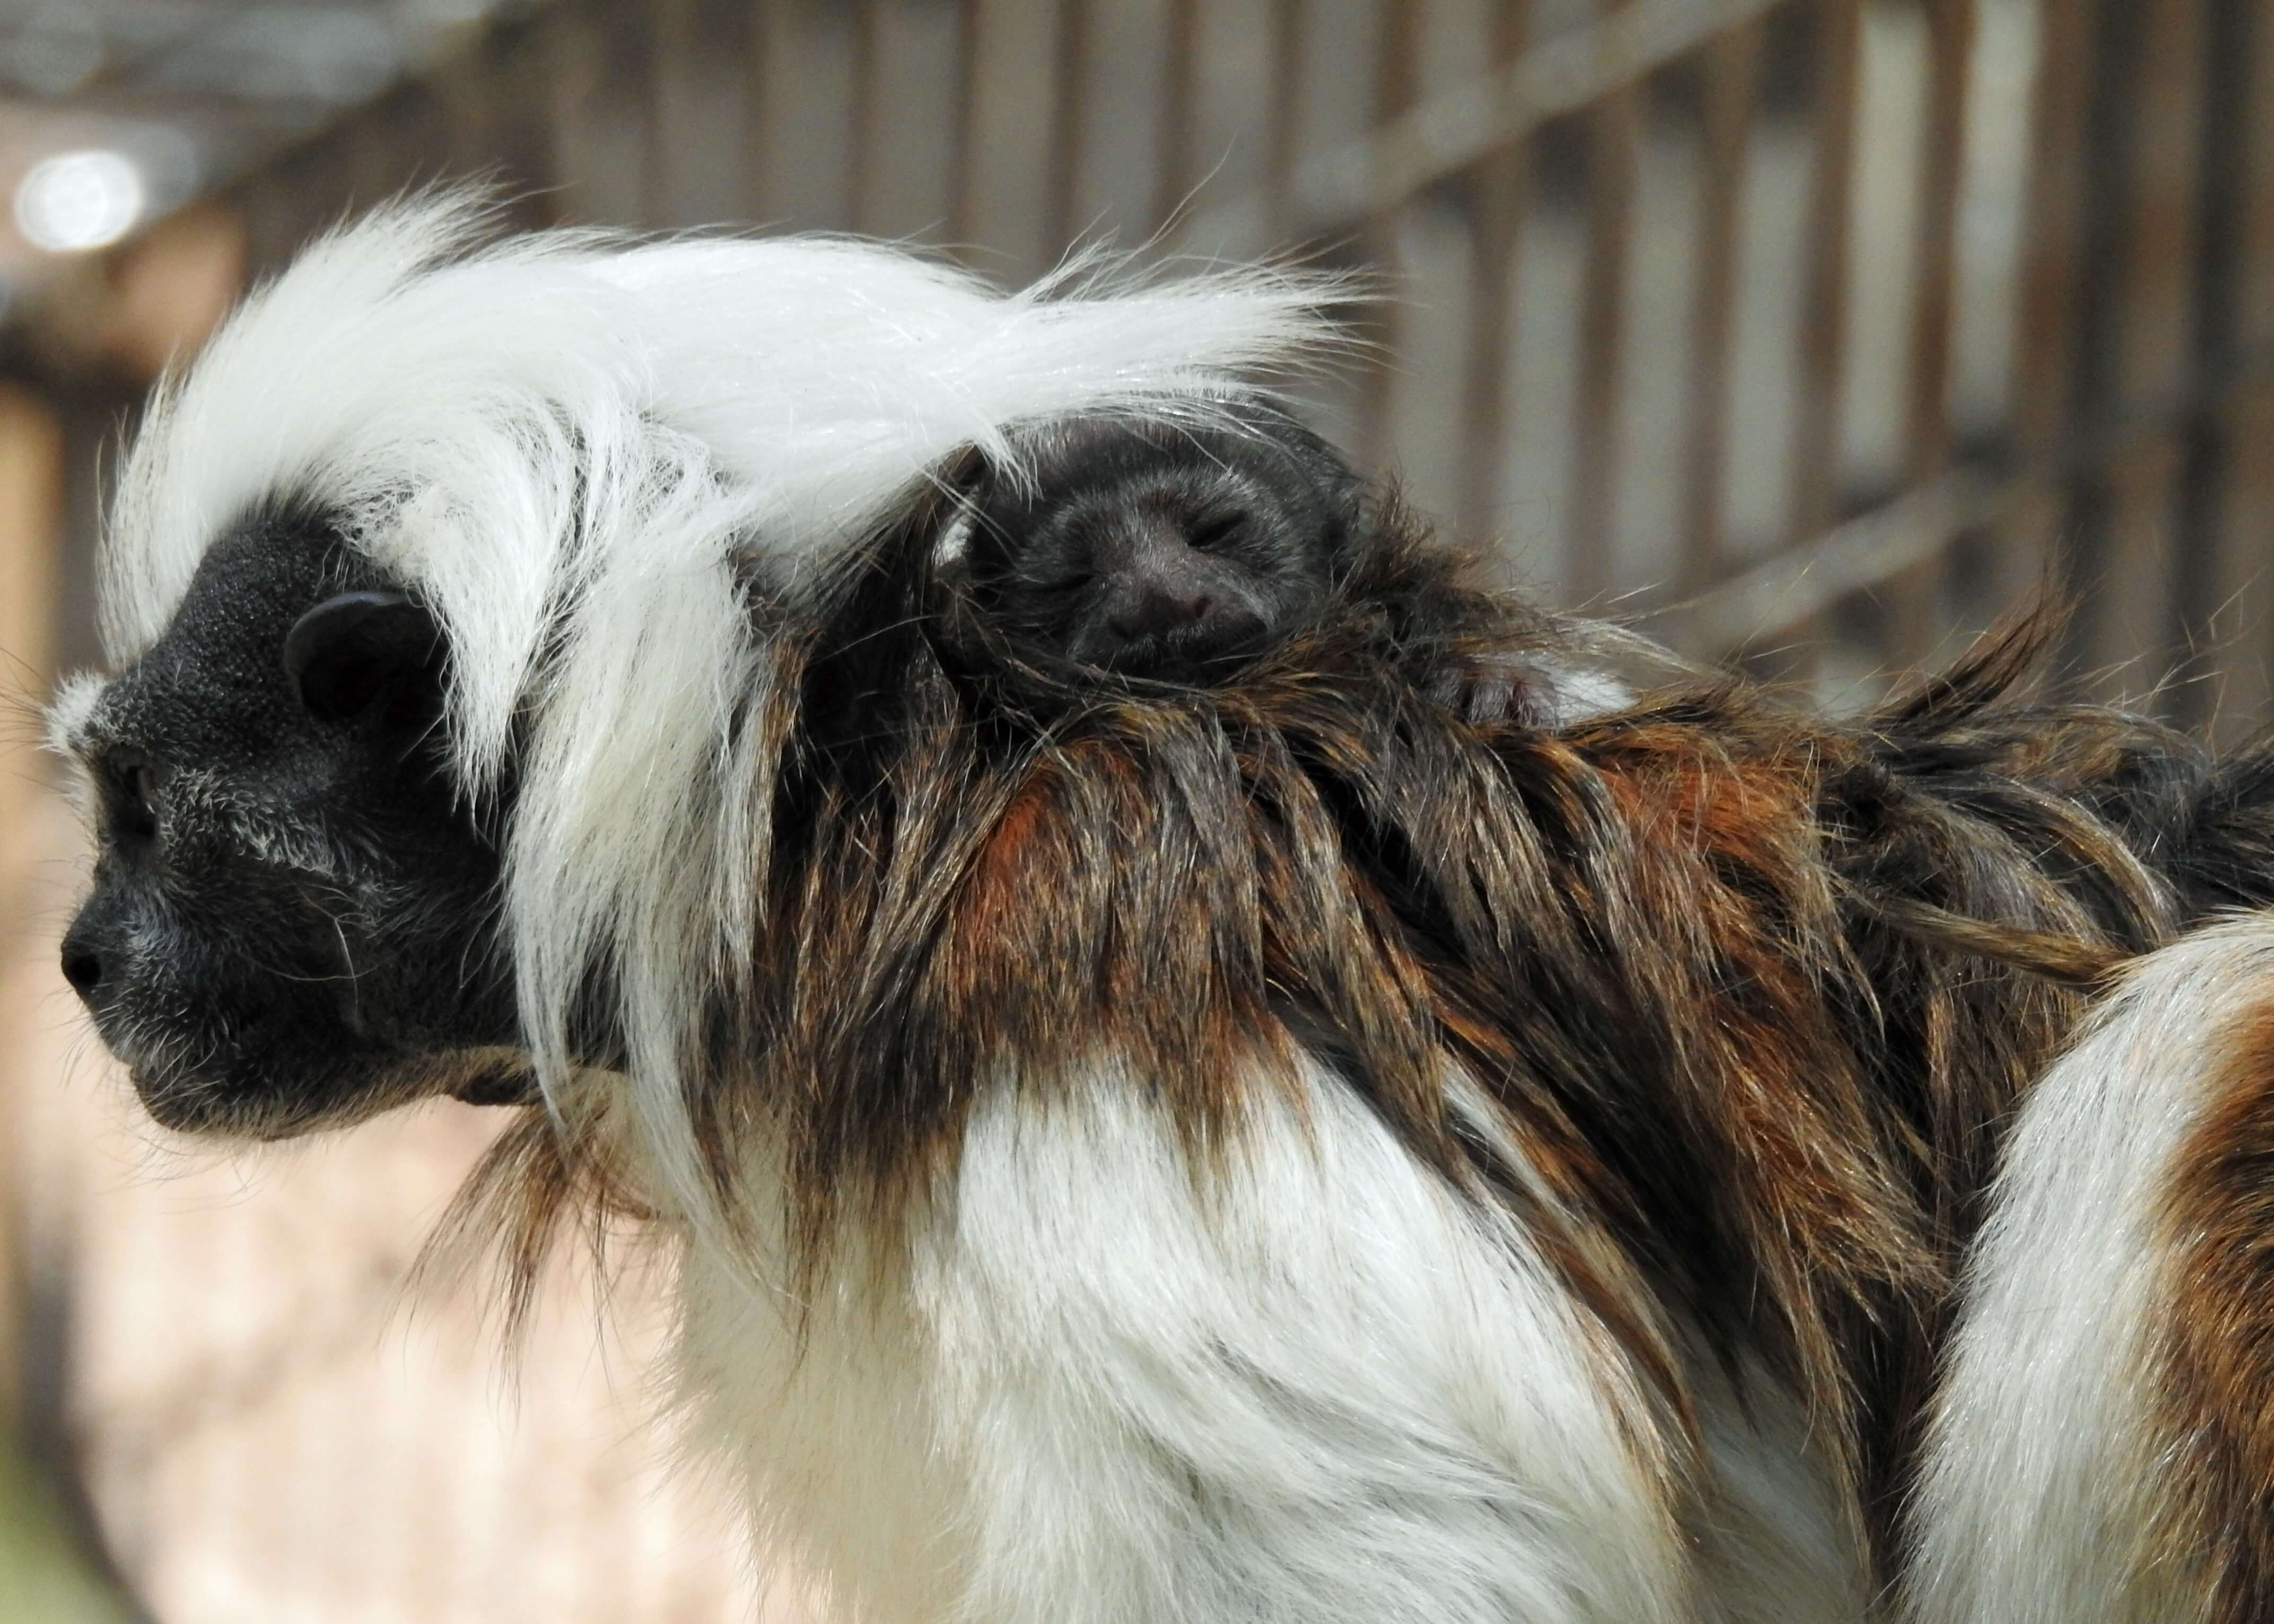 The Cape May County Zoo welcomed a new cotton-top tamarin to the zoo Aug. 3. The baby is the first of its species born at the zoo in over 17 years.